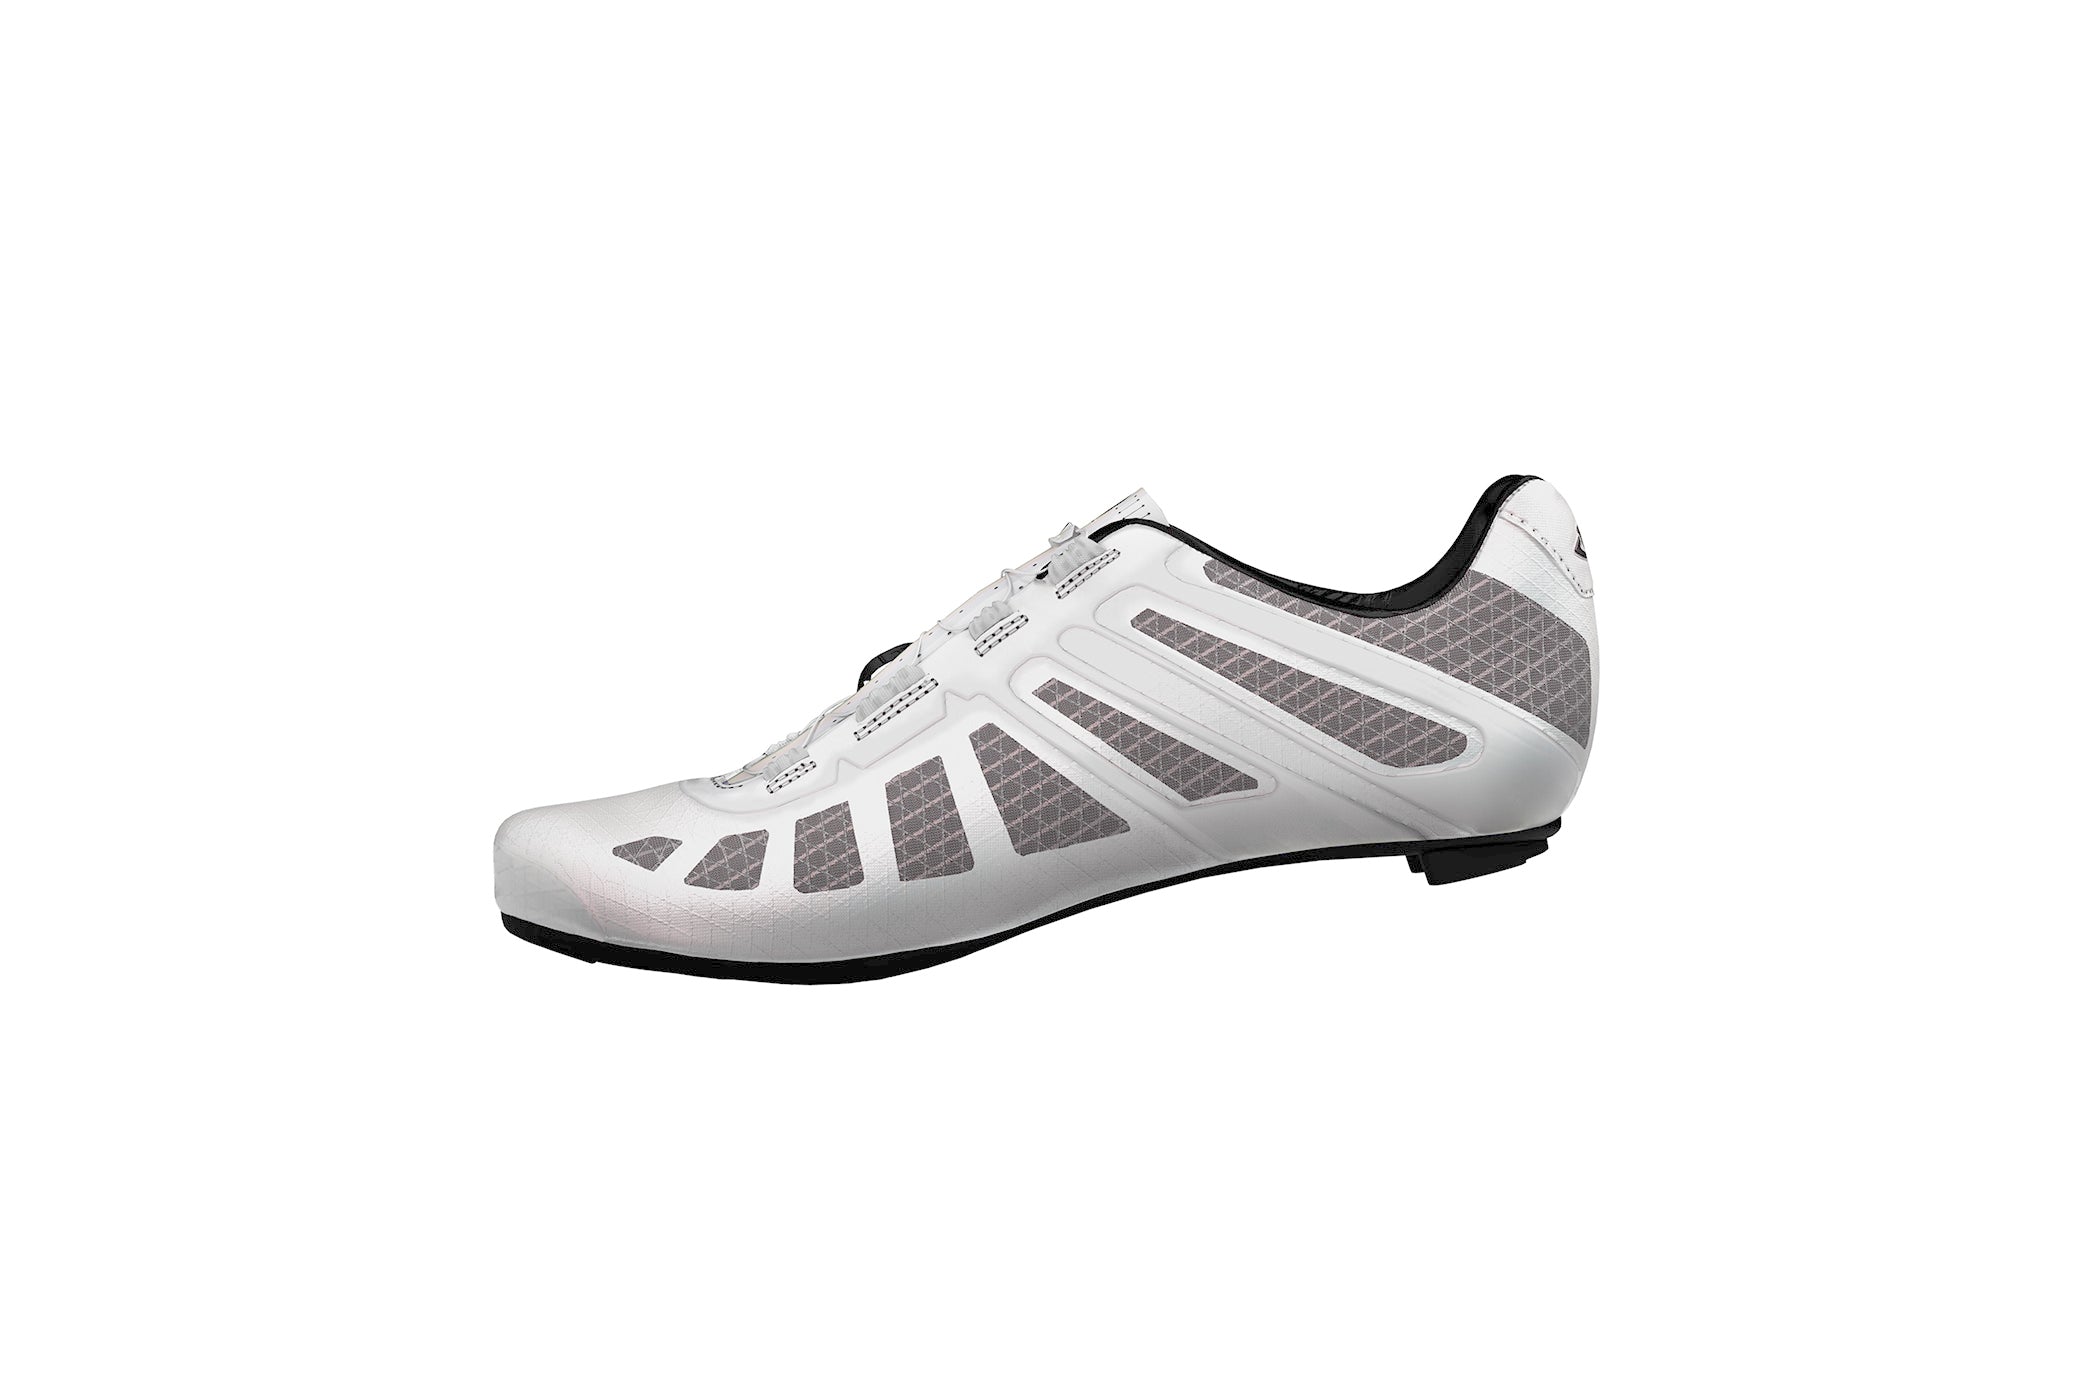 Giro Imperial Road Shoes | The Pro's Closet